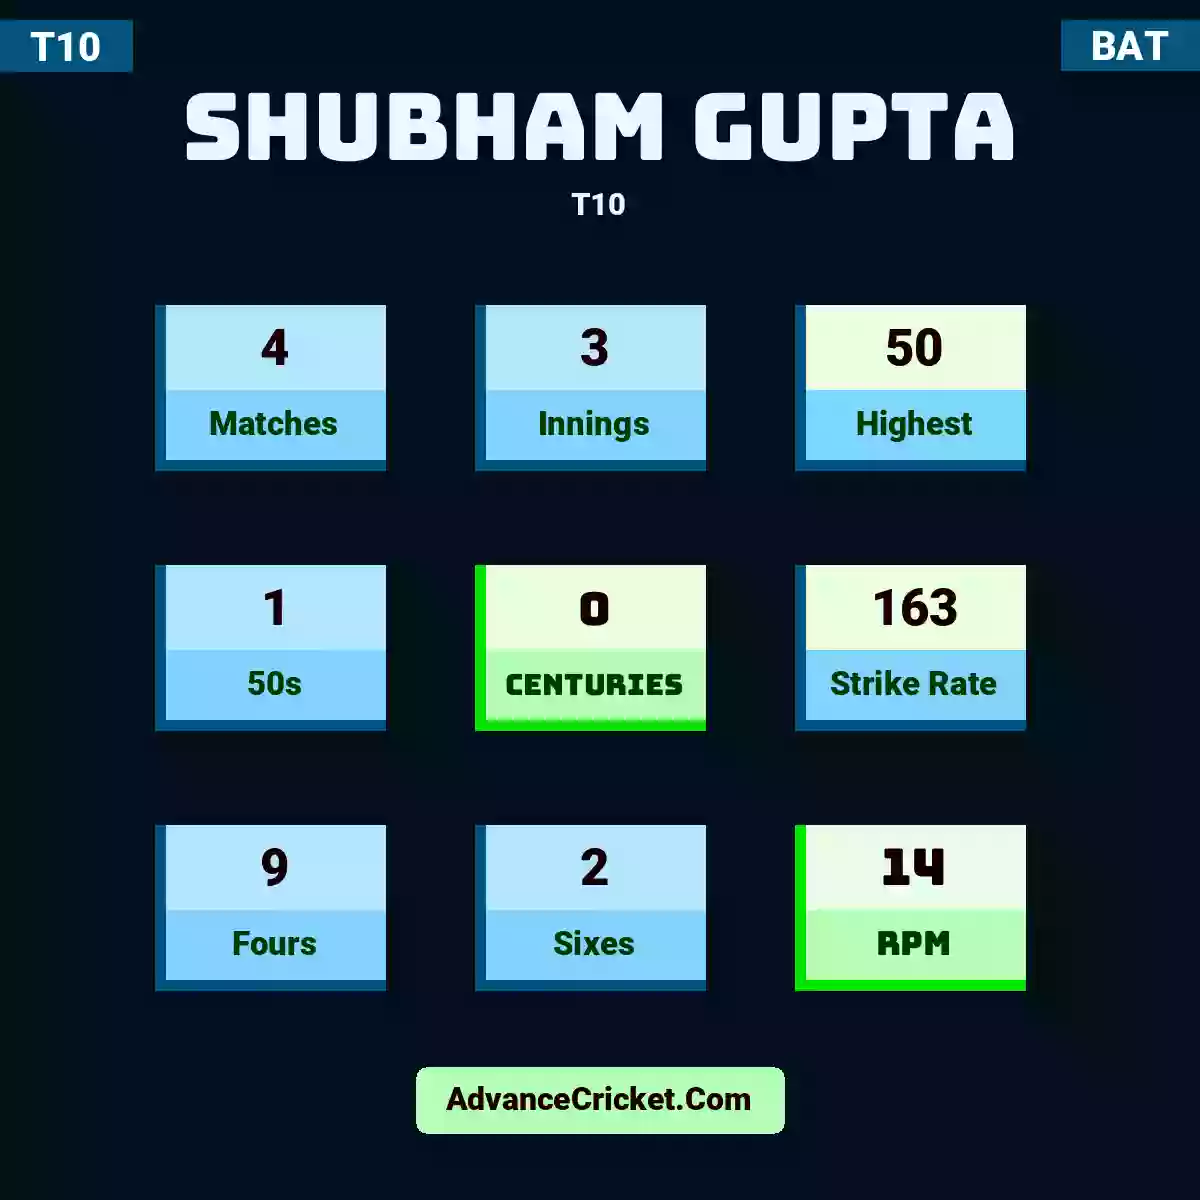 Shubham Gupta T10 , Shubham Gupta played 4 matches, scored 50 runs as highest, 1 half-centuries, and 0 centuries, with a strike rate of 163. S.Gupta hit 9 fours and 2 sixes, with an RPM of 14.